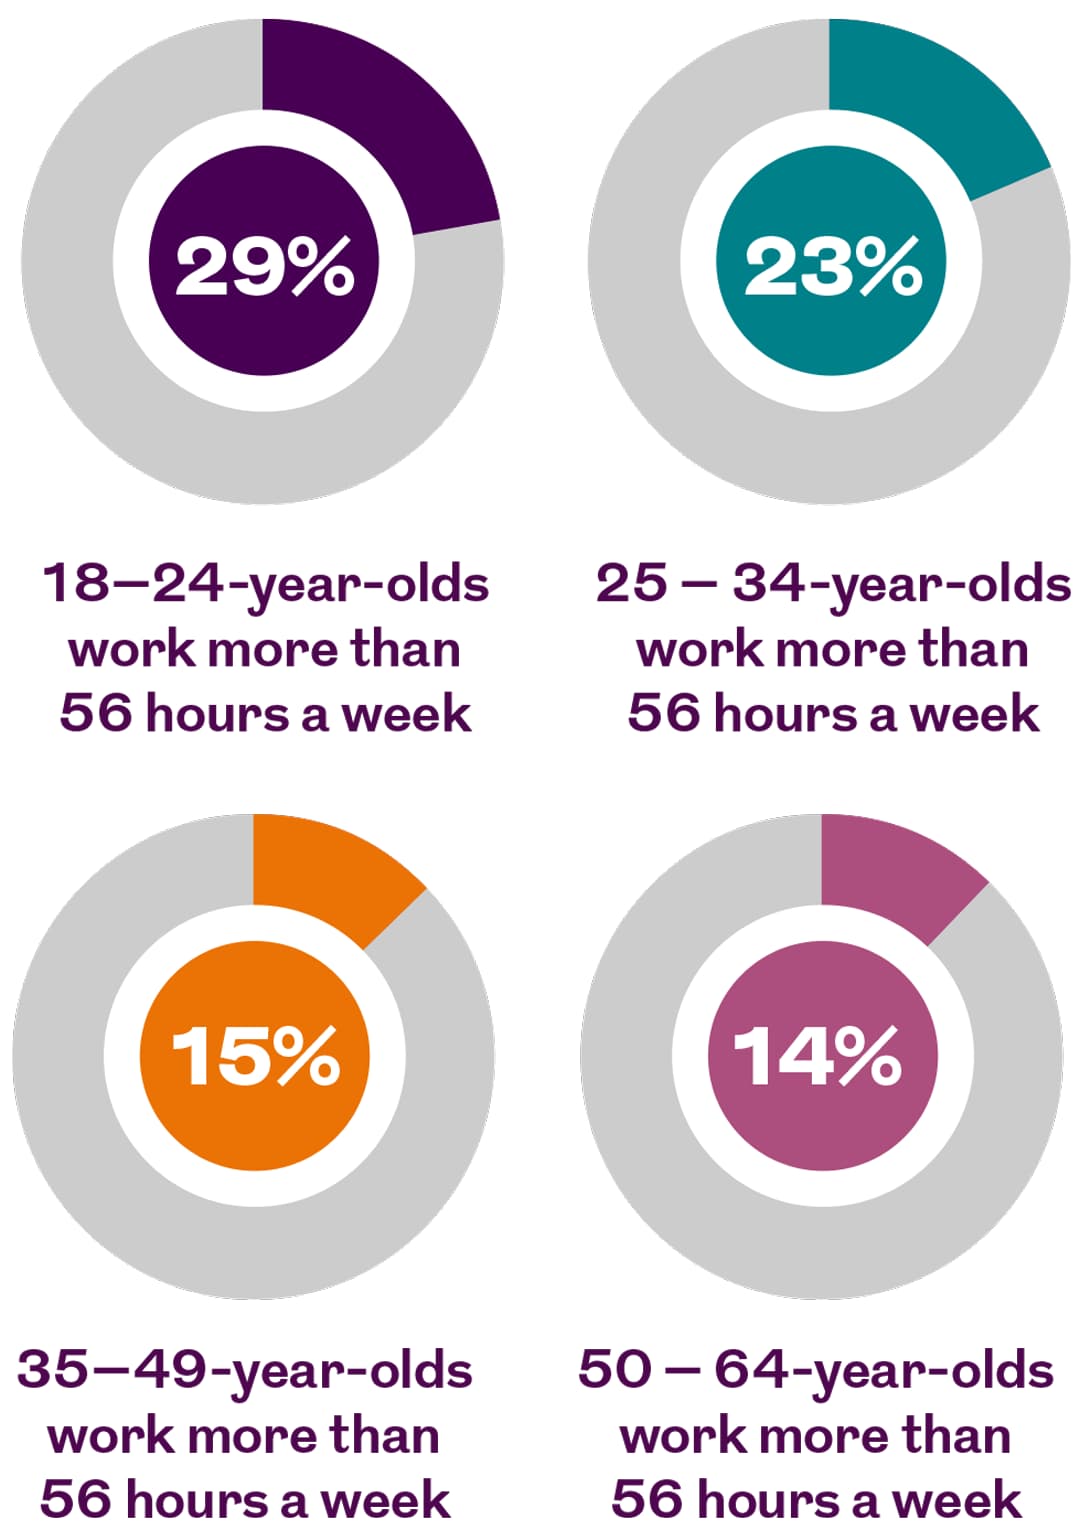 Chart showing percentages of different ages working more than 56 hours a week.. This image is an infographic and has alternative text available if you are using a screen reader.